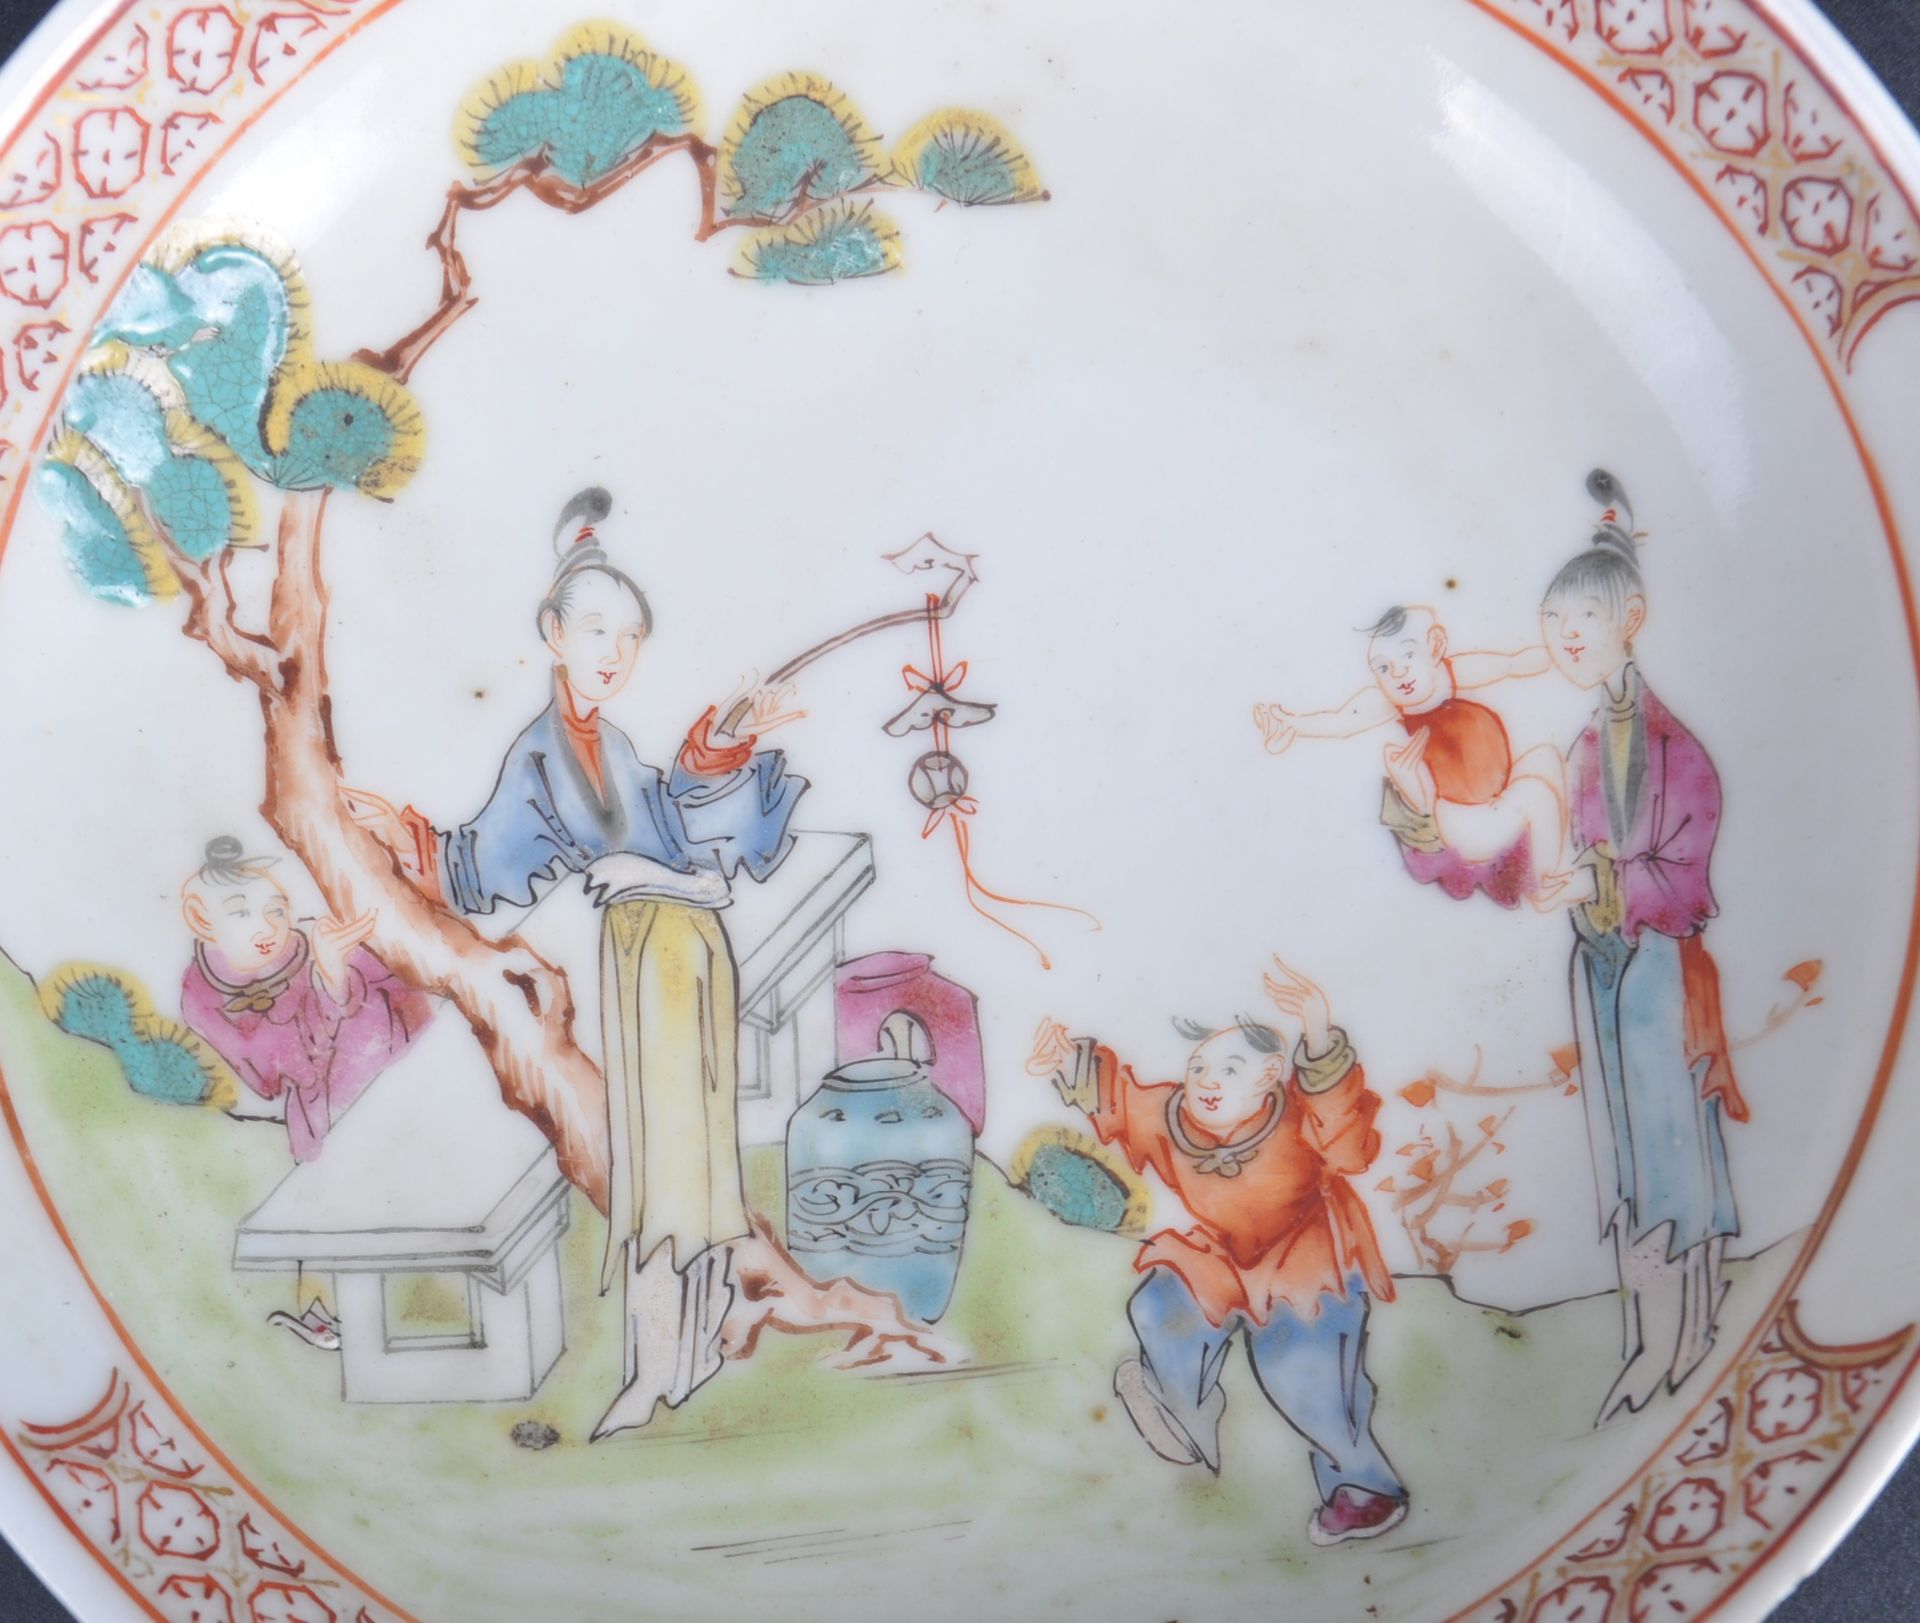 18TH CENTURY CHINESE PORCELAIN TEACUP & SAUCER - Image 3 of 7